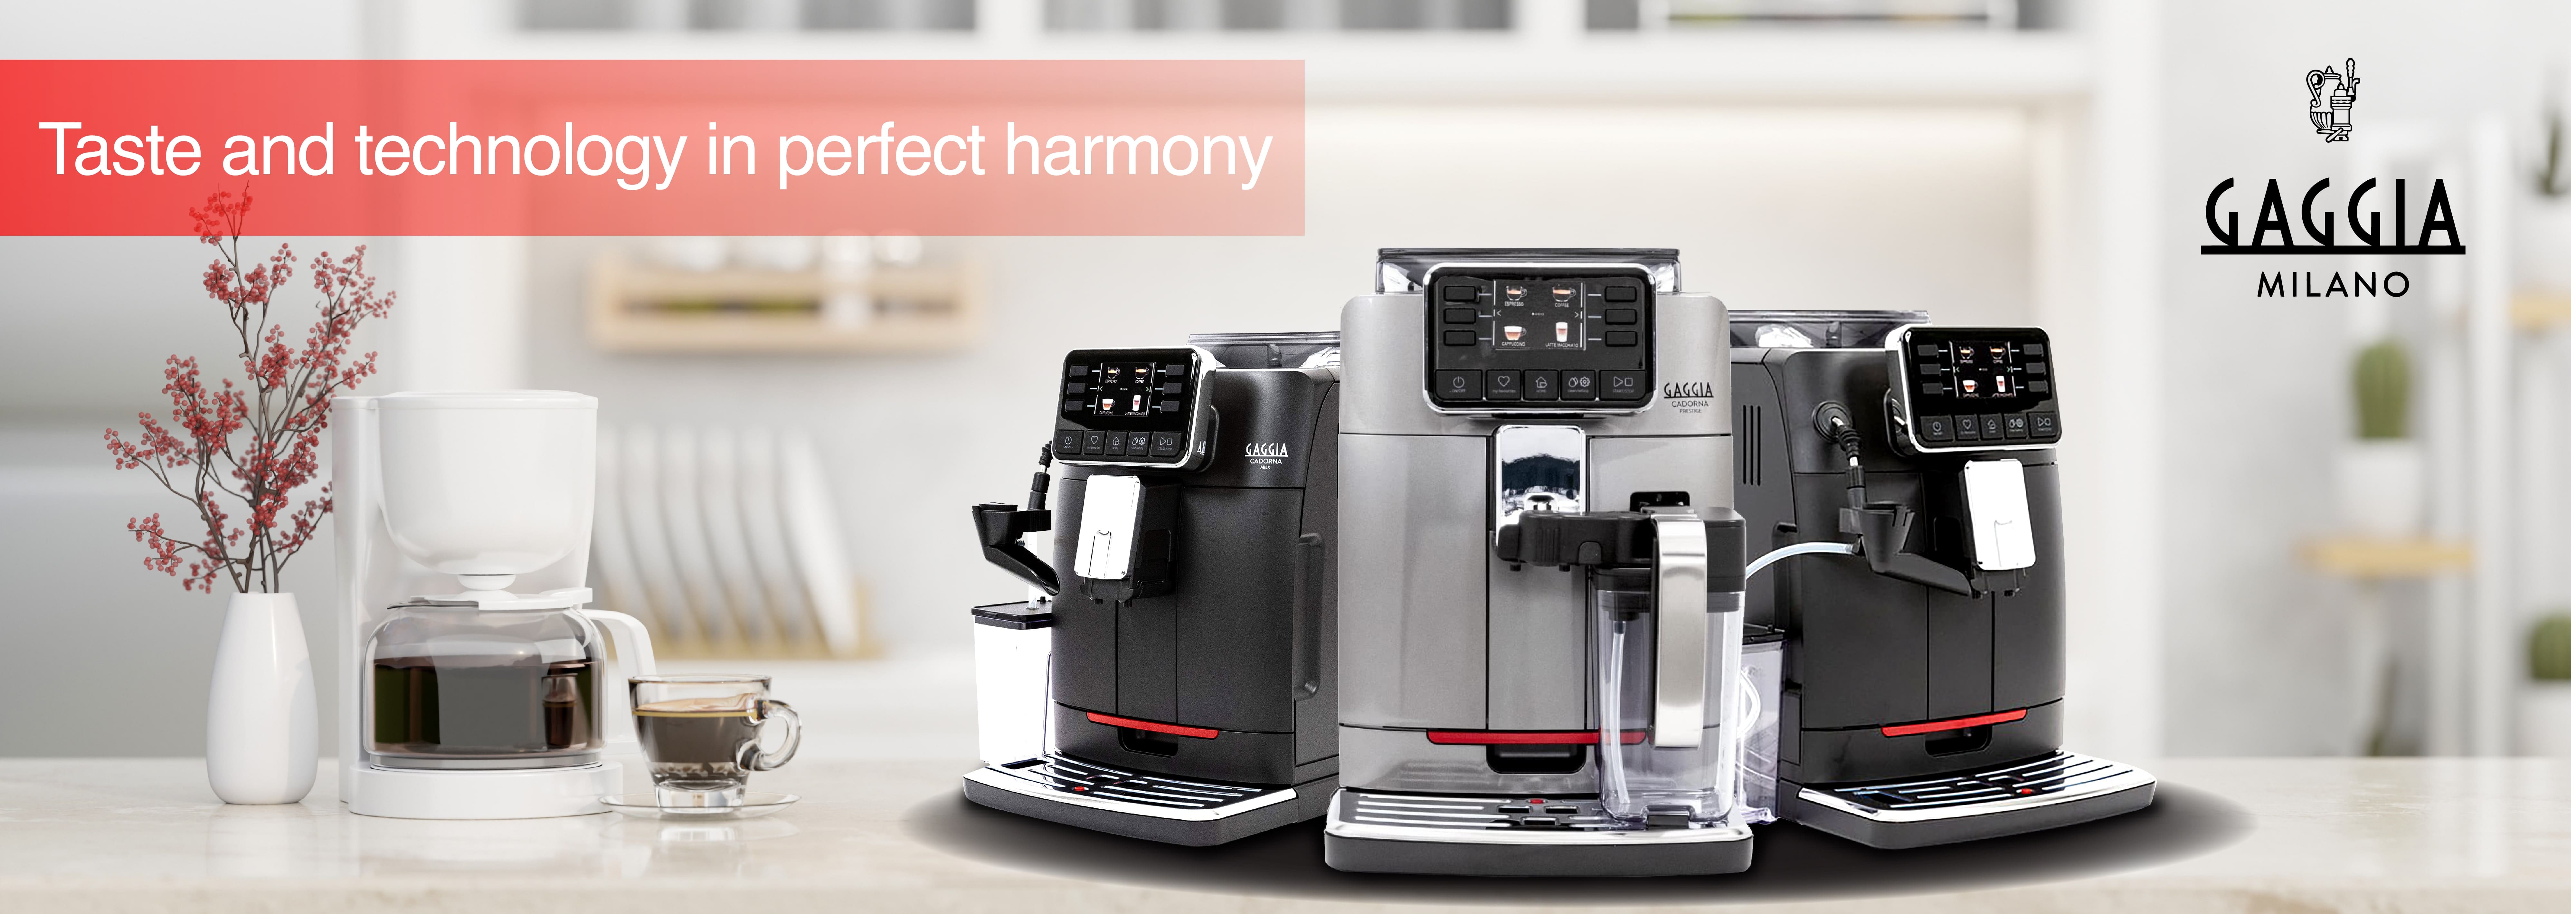 Gaggia Milano | Taste and Technology in perfect harmony                                                                                                                                                                                                                                                  